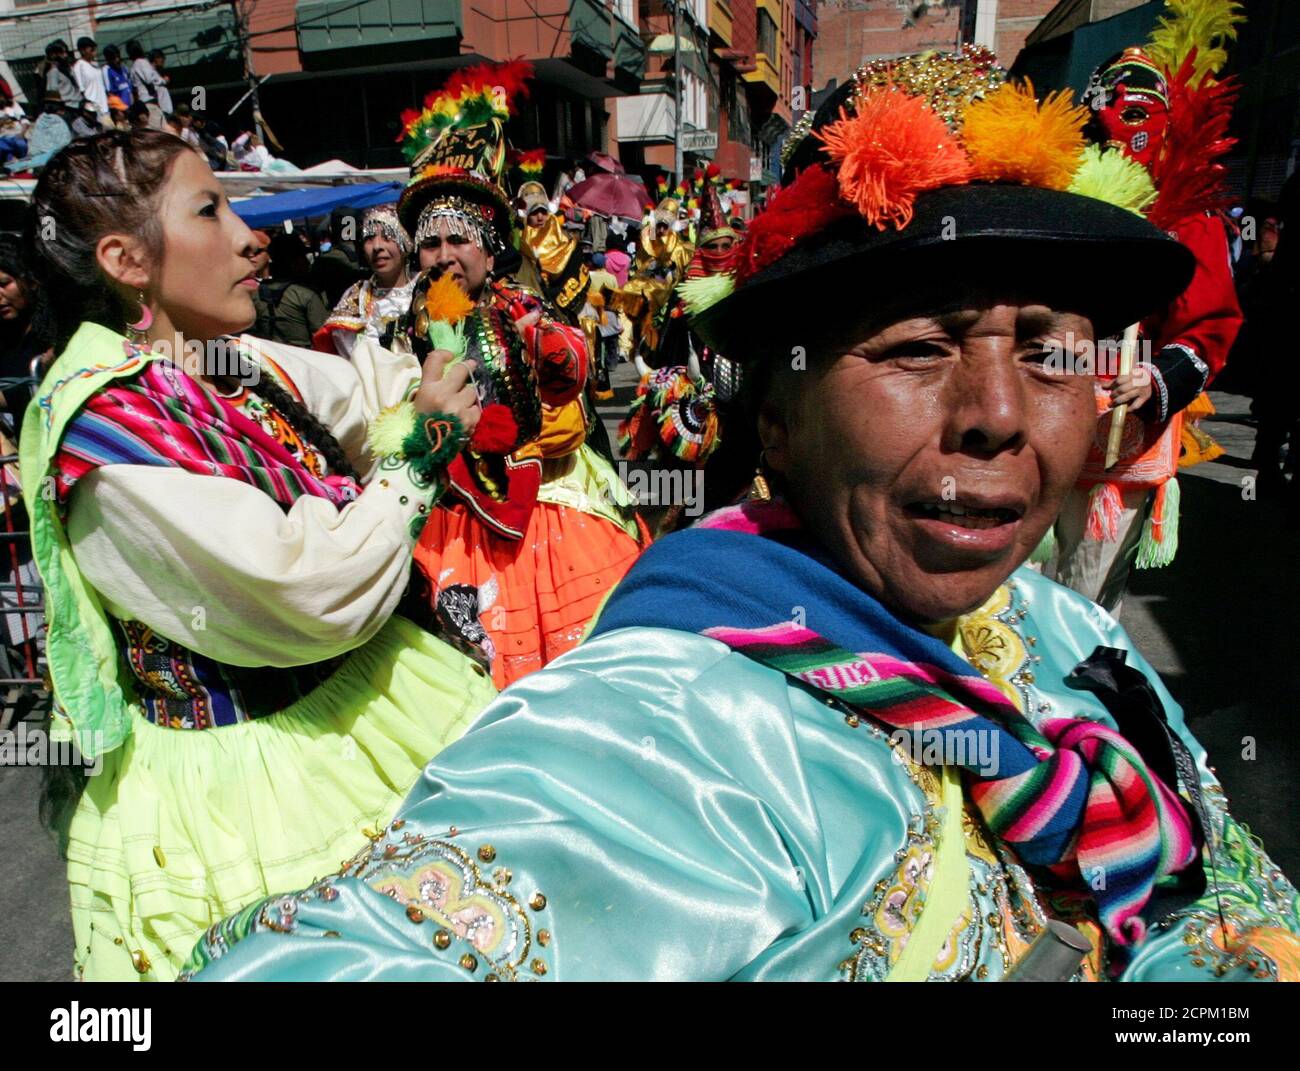 Bolivian Aymara Indian woman dance as they take part in the 'El Senor del Gran Poder' (Feast of the Great Power of Jesus) festival in La Paz, Bolivia May 21, 2005. The feast, which is one of the most important and expressive manifestations of La Paz' cultural identity, had its origins in the arrival in the Ch'ijini area of a canvas showing a three-faced figure. The image was reinterpreted according to the Aymara tradition to mean that one asked the face on the right for good things, the left for negative things, while one prayed to the center face. The Catholic Church had the canvas repainted  Stock Photo